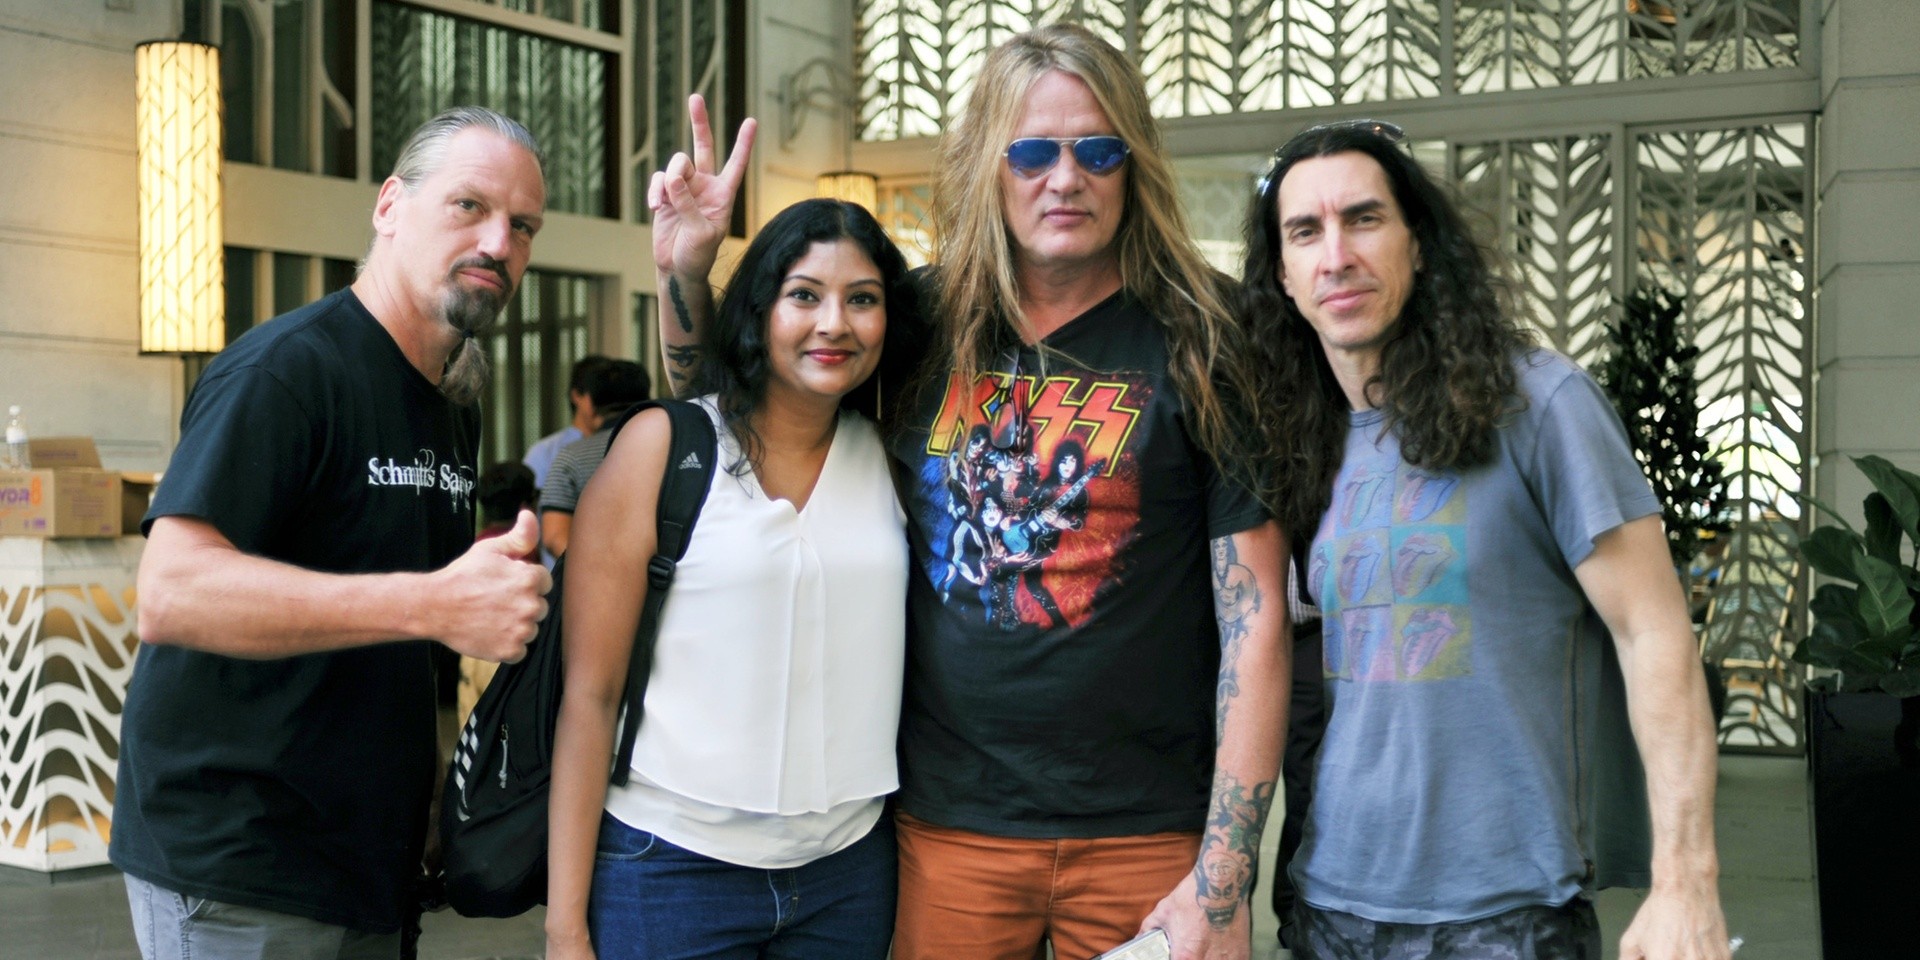 How I spent my day with Sebastian Bach shopping for vinyl records in Singapore